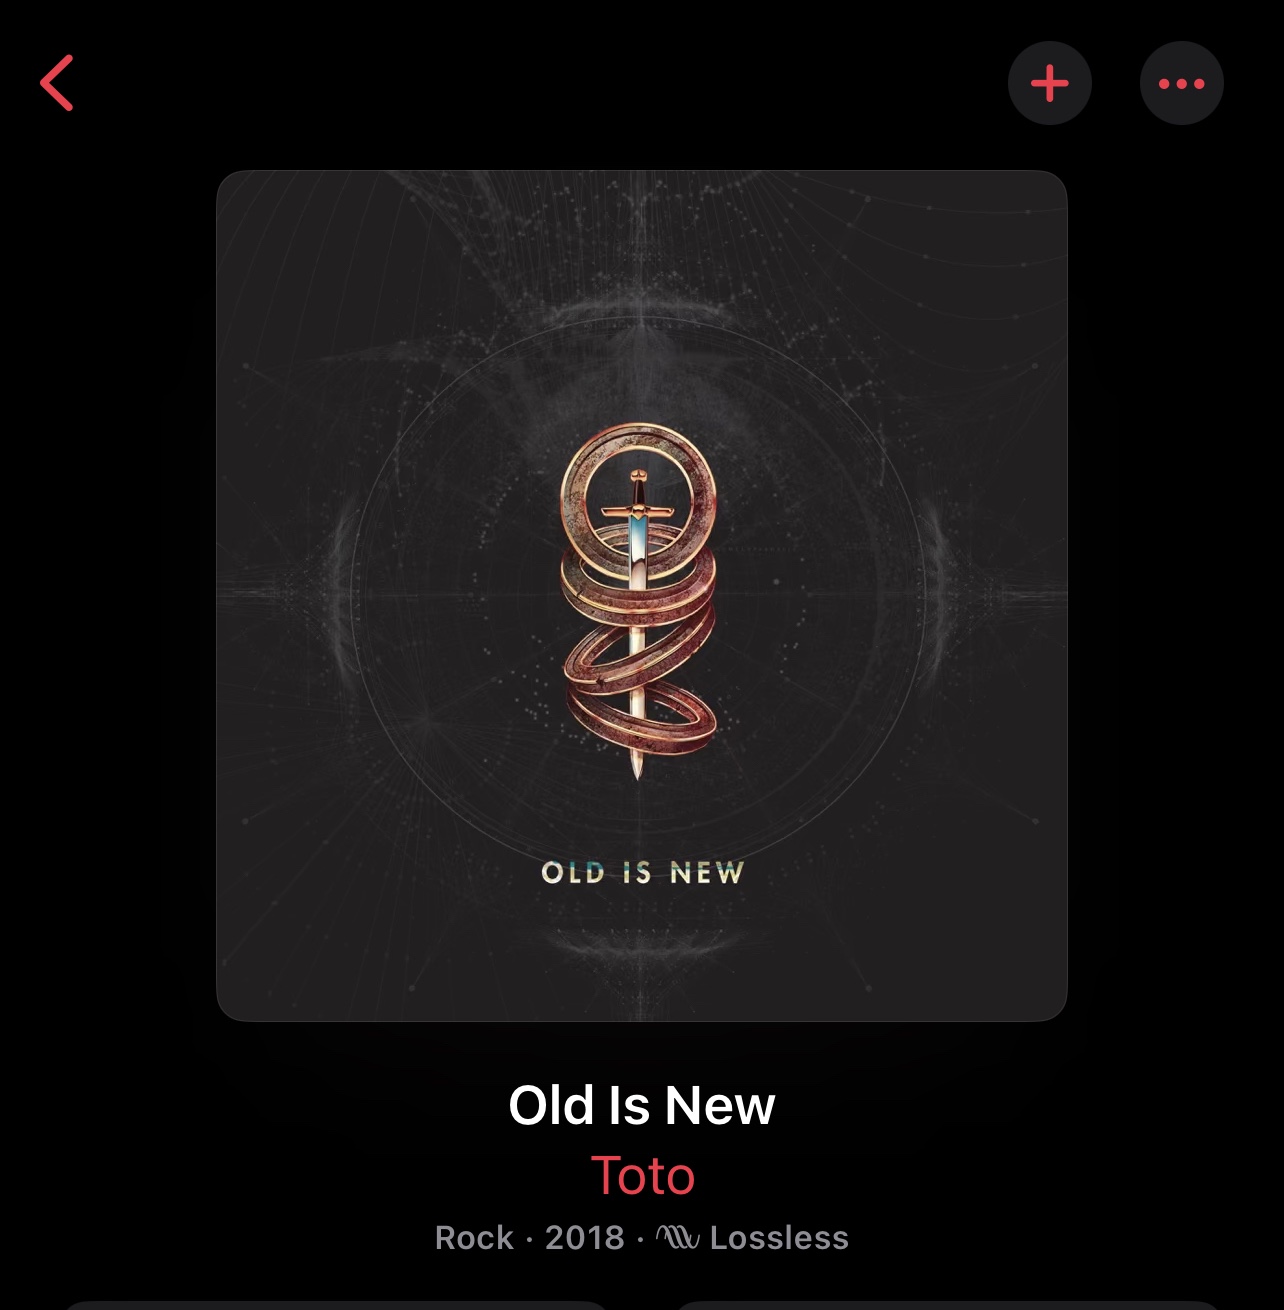 Toto – “Old Is New”